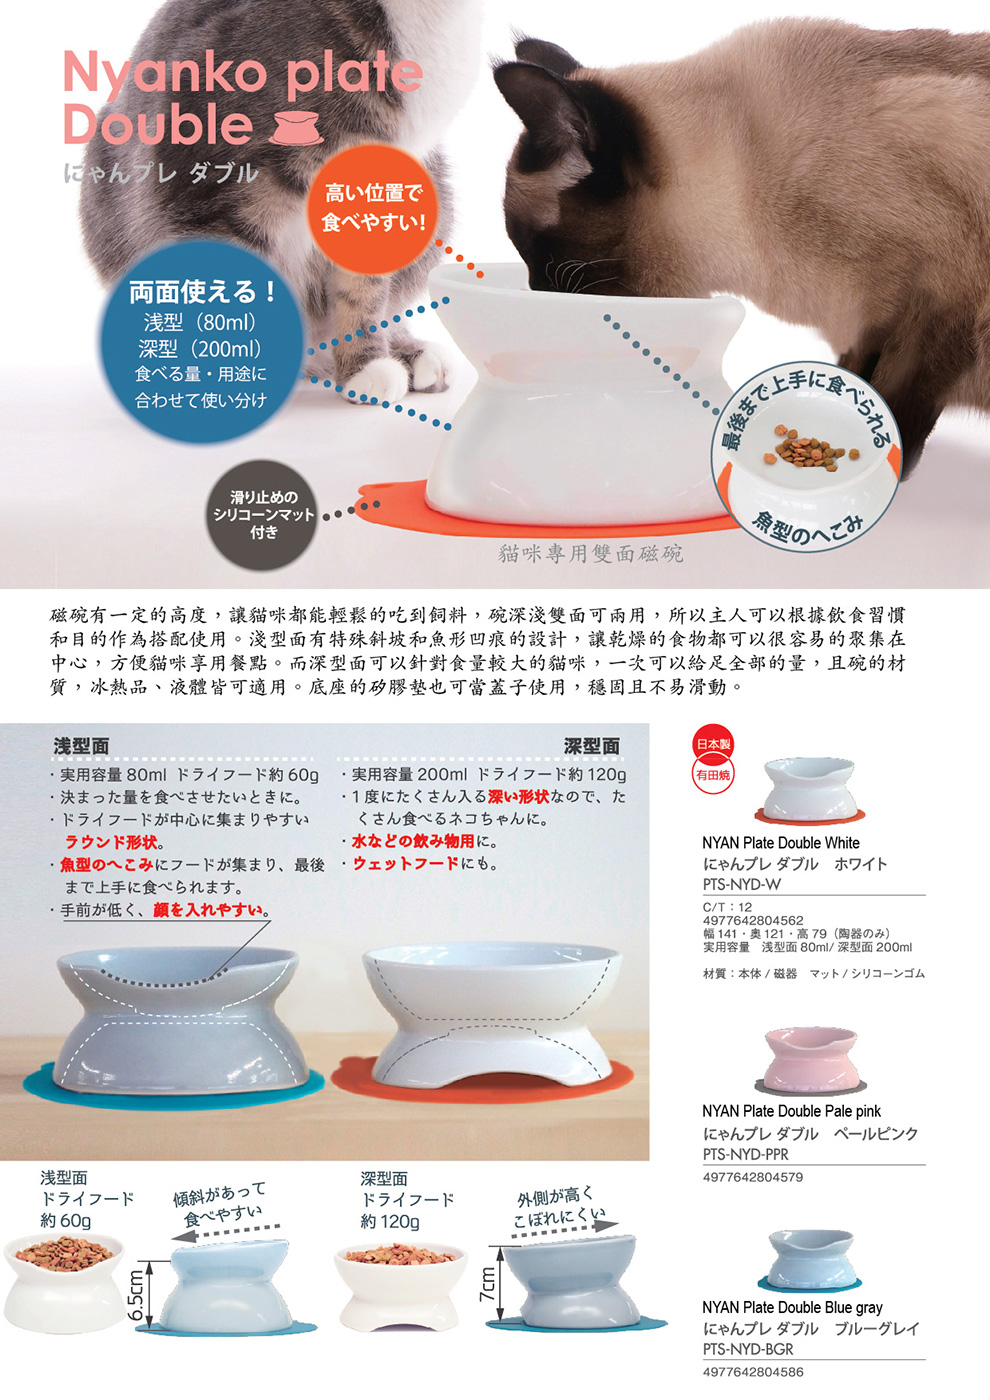 HARIO, Pet goods, Made in Japan, Cat, Food Bowl, Nyanko plate, Double, PTS-NYD-W, PTS-NYD-PPR, PTS-NYD-BGR